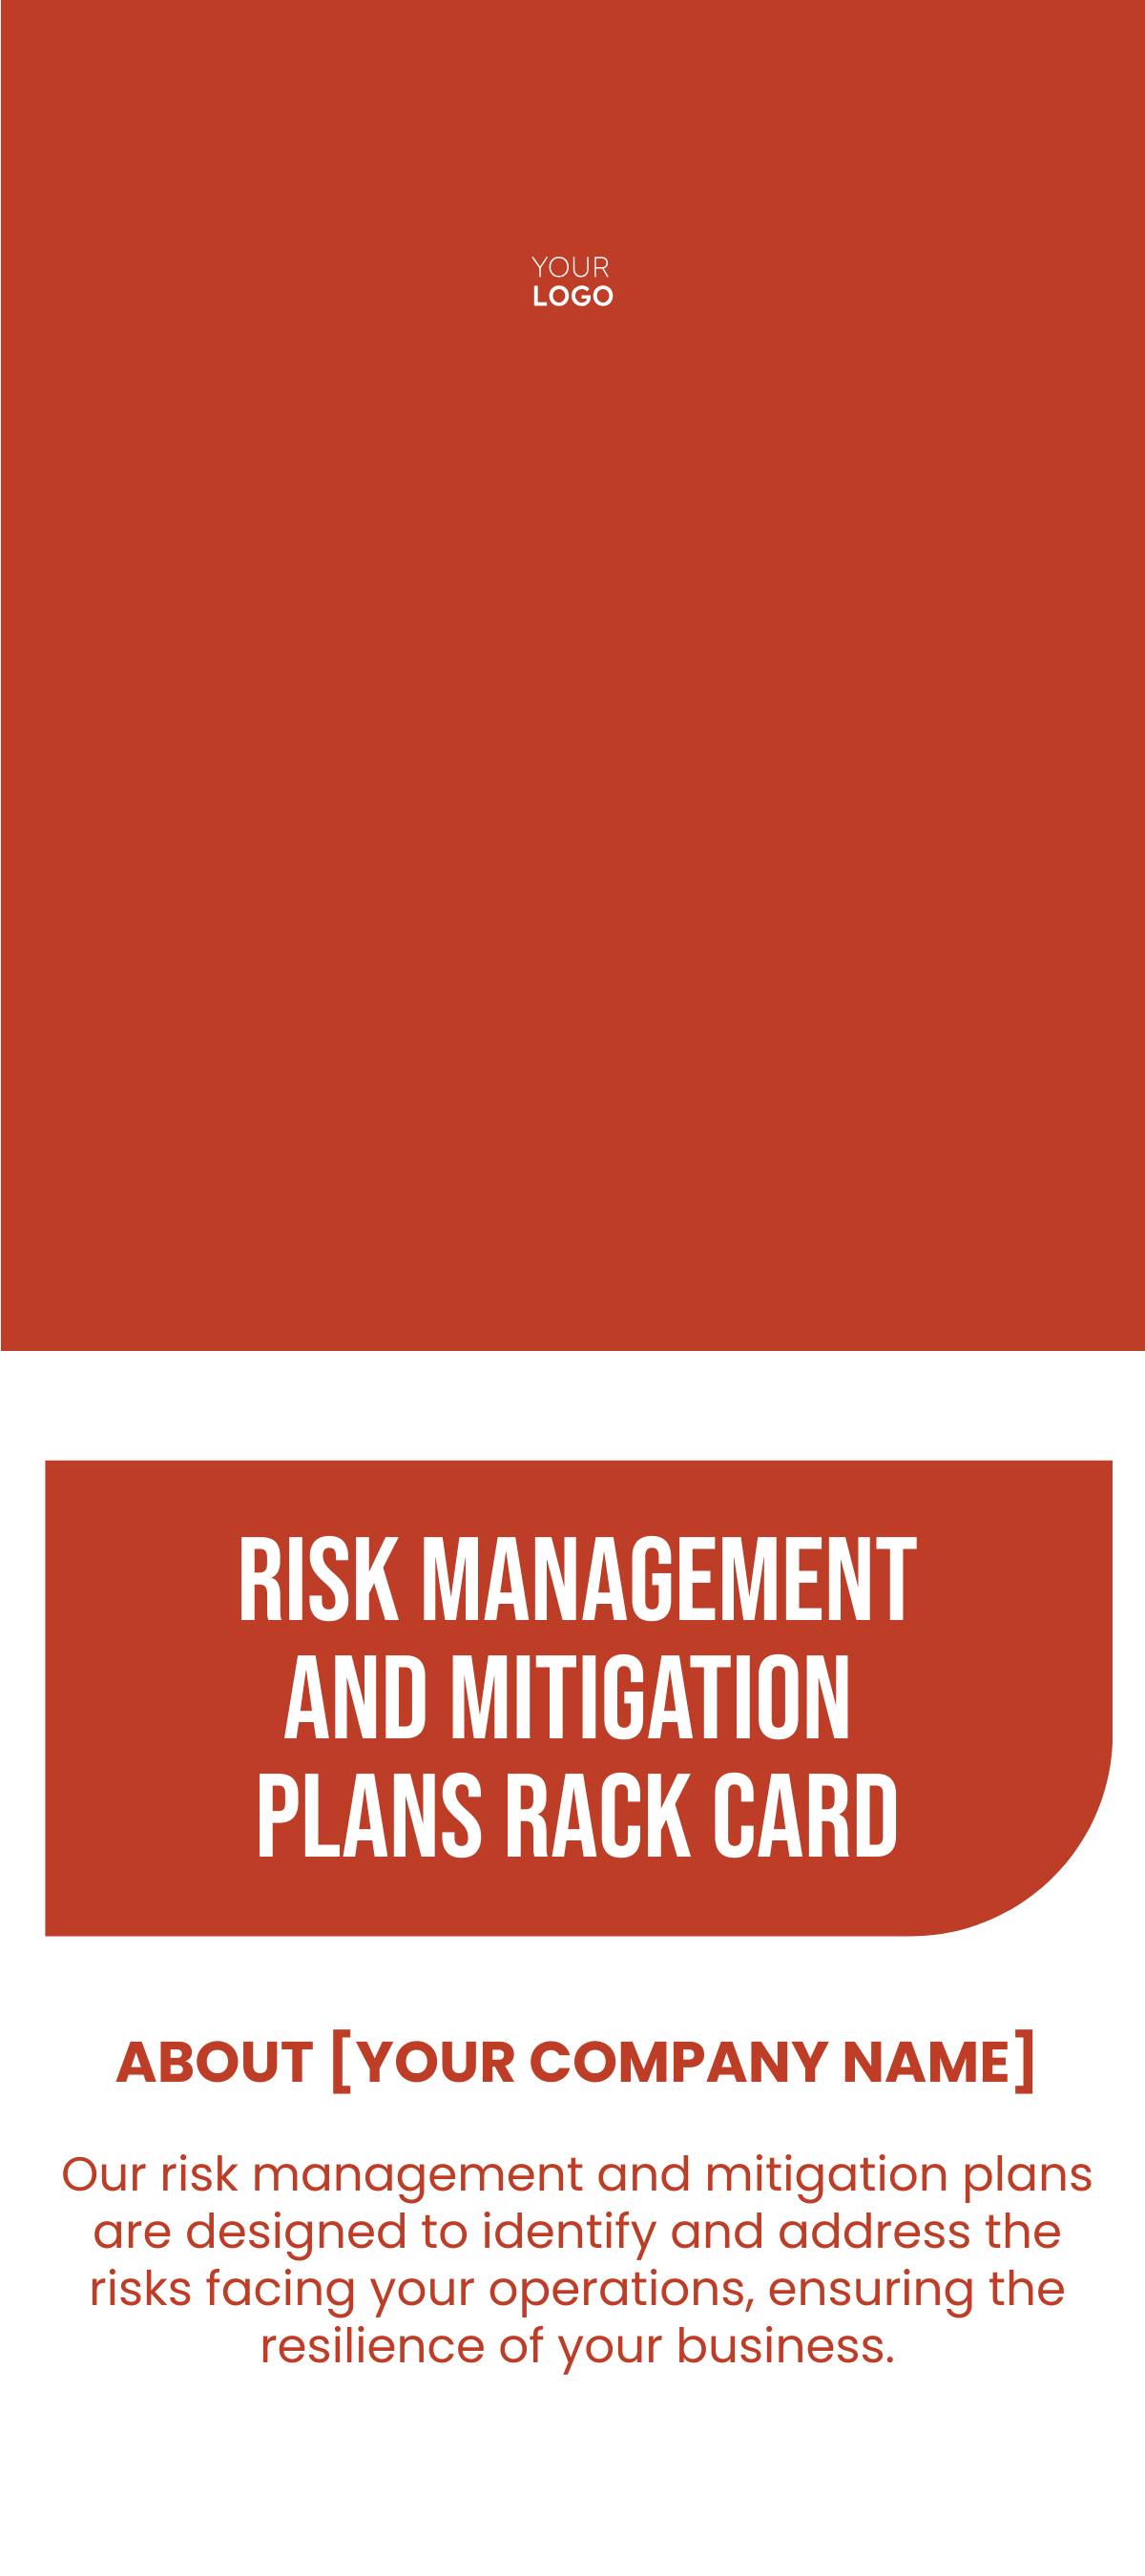 Free Risk Management and Mitigation Plans Rack Card Template